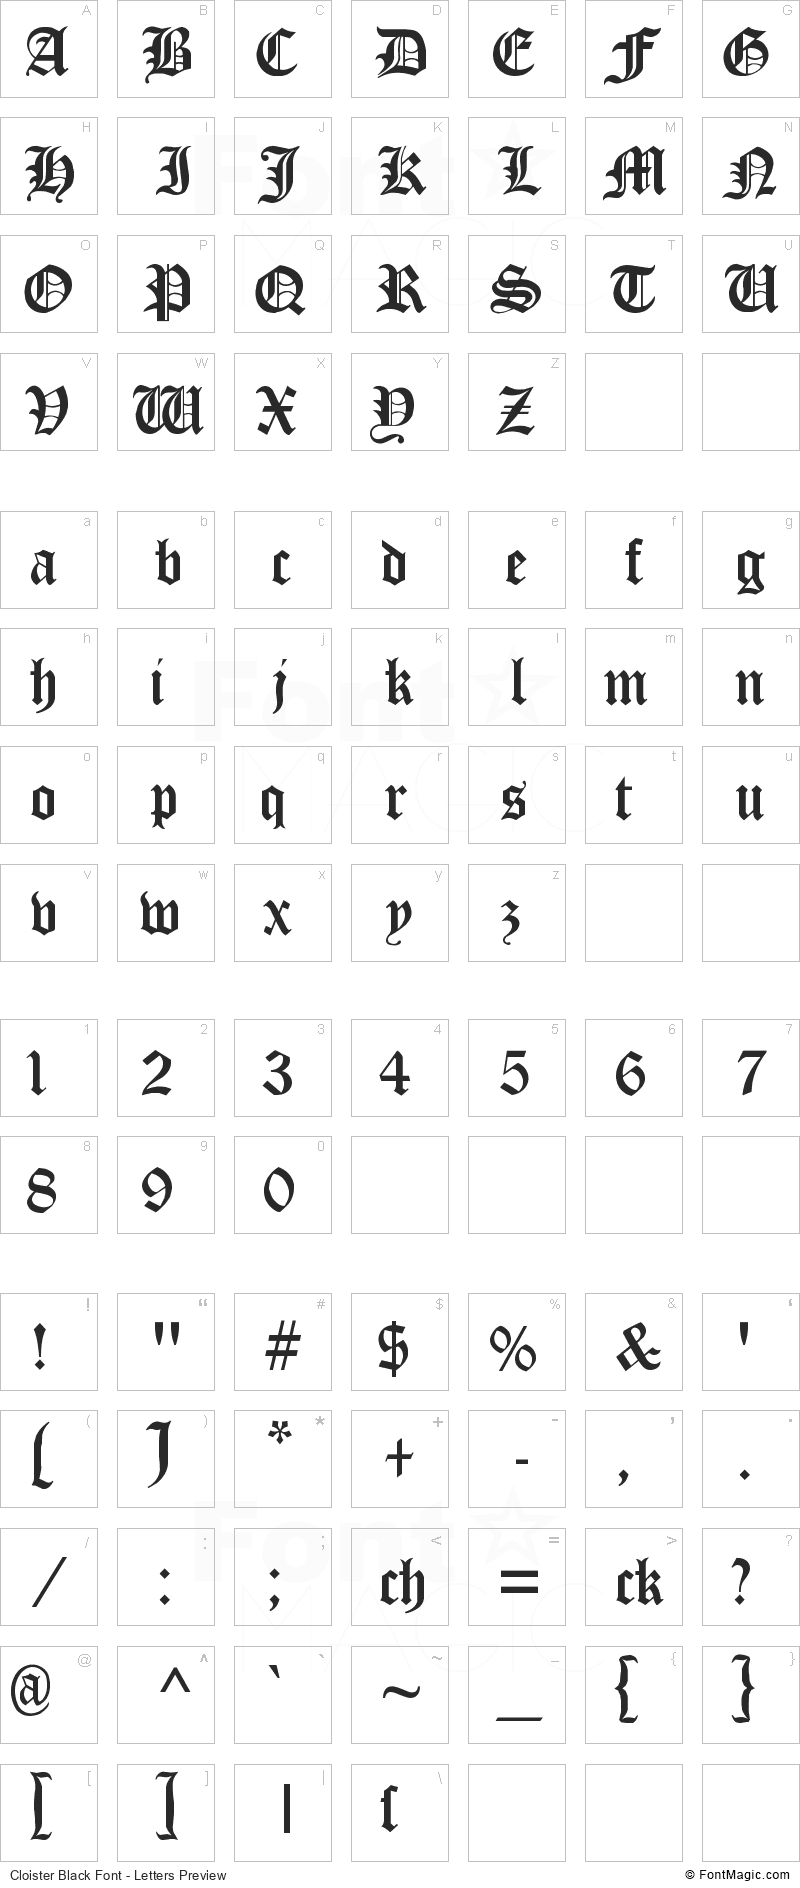 Cloister Black Font - All Latters Preview Chart